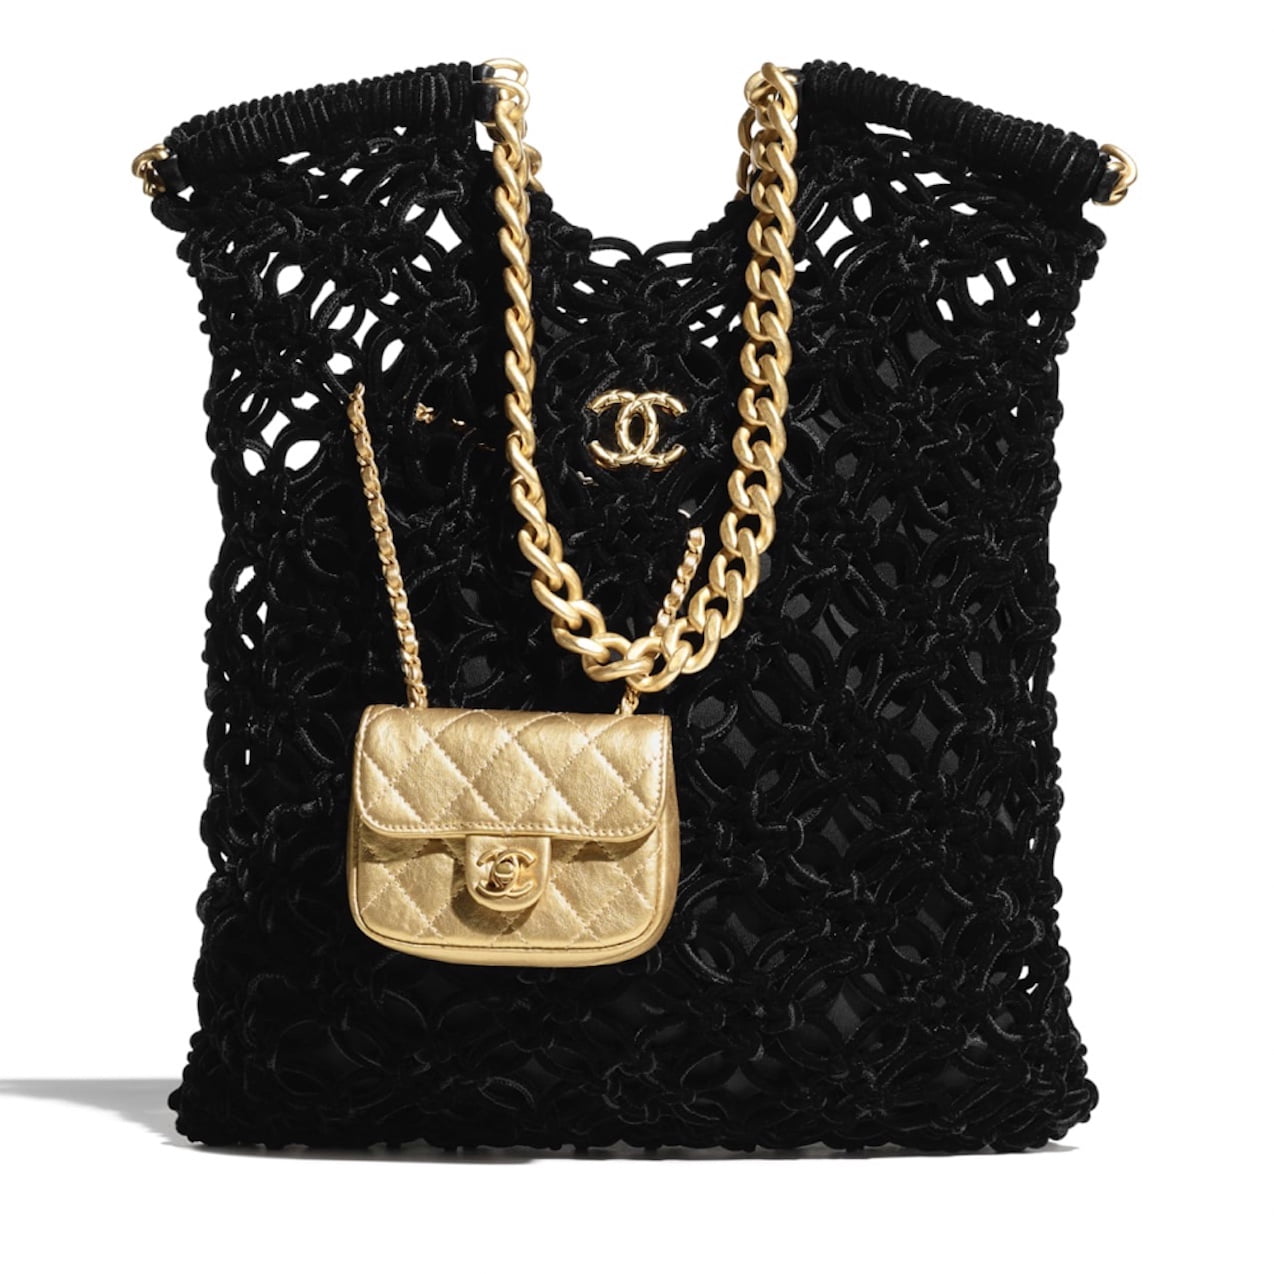 New interpretations of the CHANEL Flap Bag to look out for: a